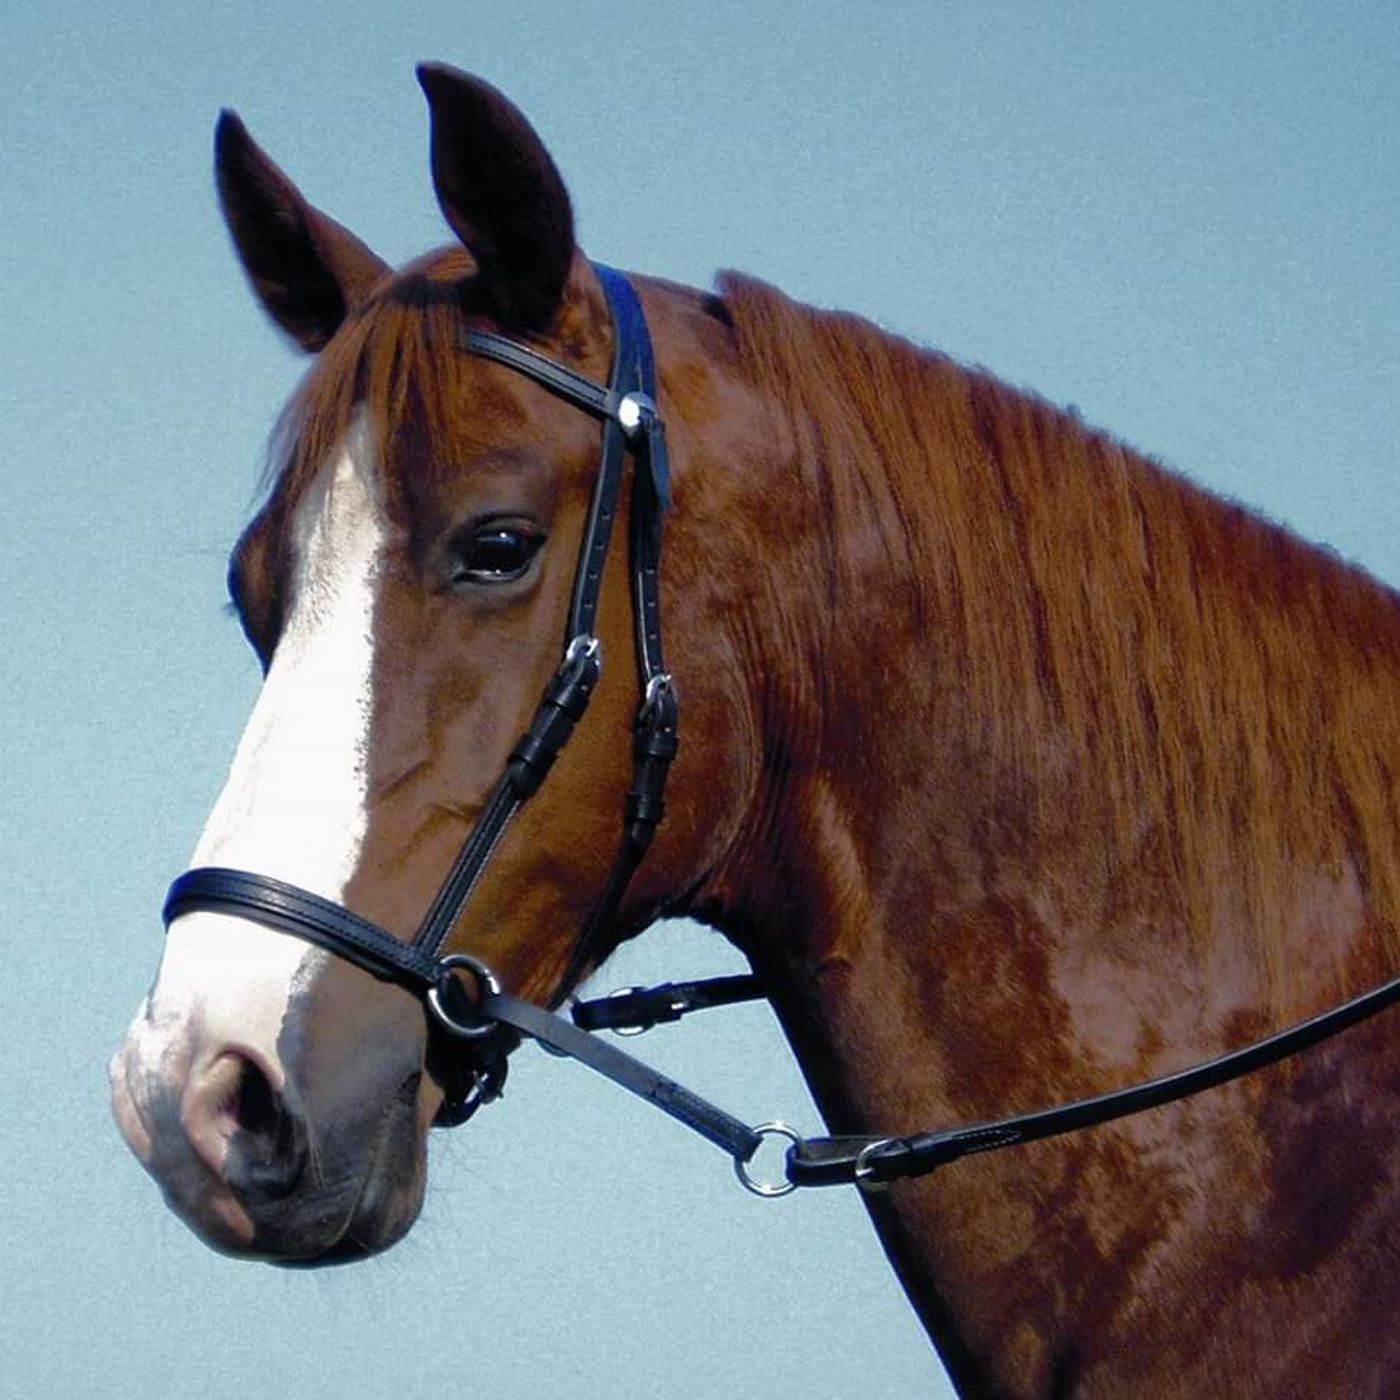 HorseSense Episode 10 - Bits and Bitless Bridles, Emeritus Prof. Bob Cook shares some astonishing information you probably didn't know